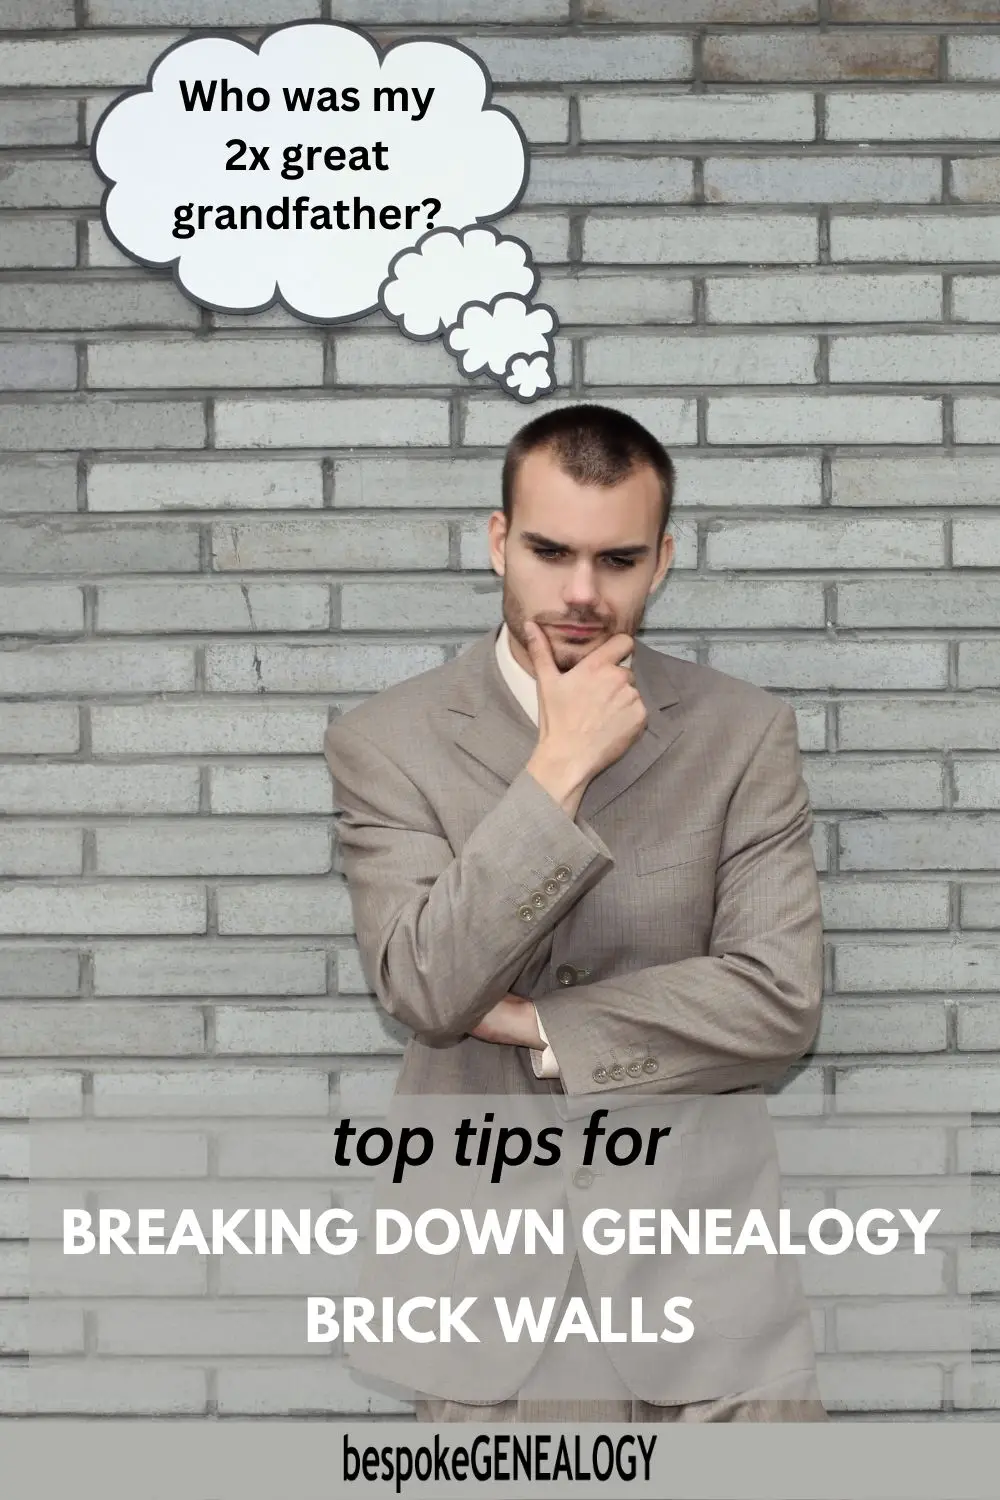 Top tips for breaking down genealogy brick walls. Photo of a man in a suit deep in thought in front of a brick wall.